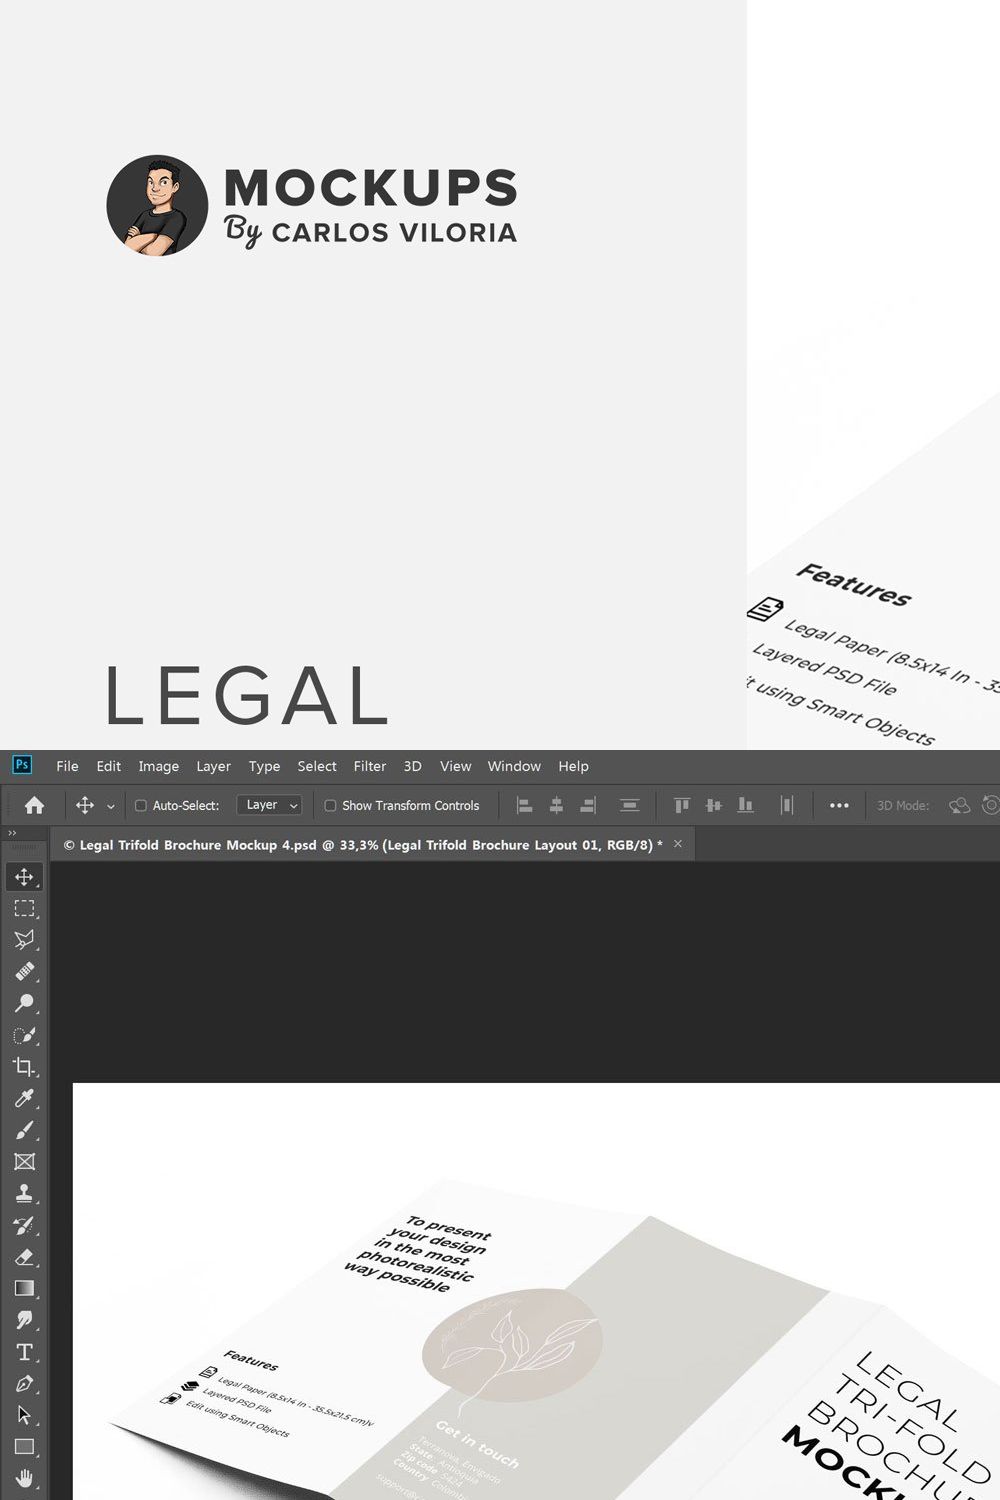 Legal Trifold Brochure Mockup – Open pinterest preview image.